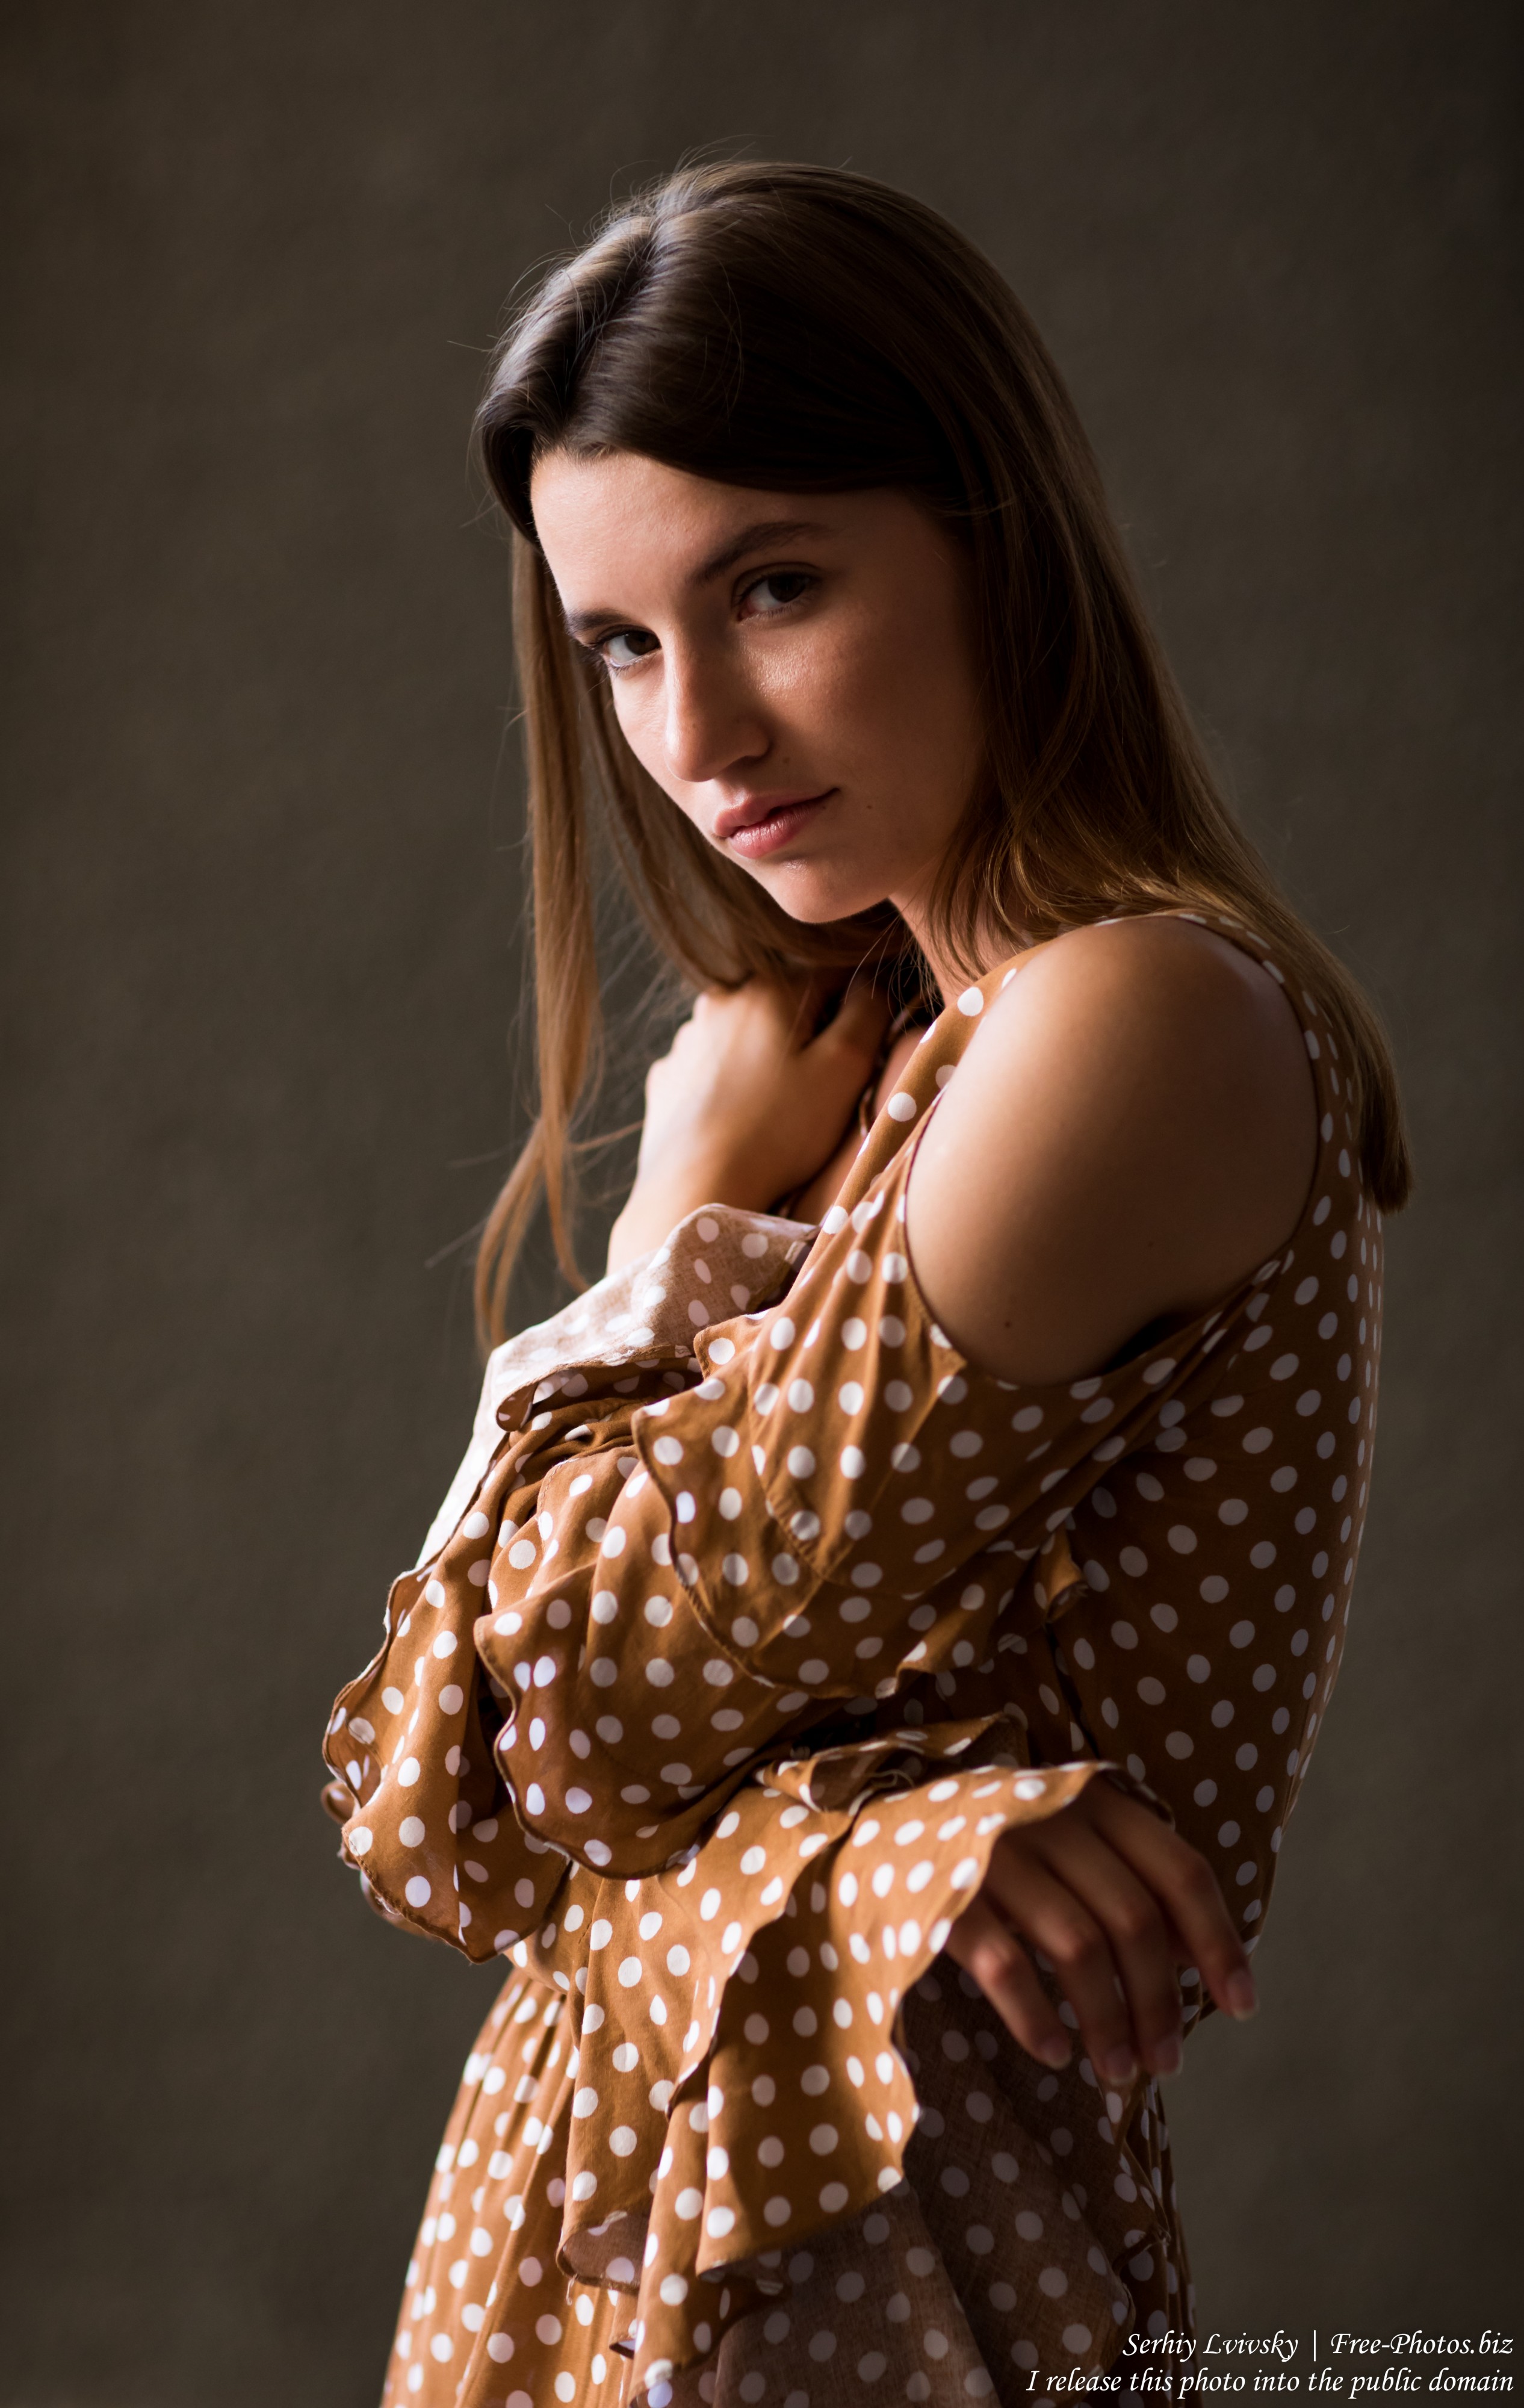 Sophia - a 21-year-old girl photographed in August 2019 by Serhiy Lvivsky, picture 11